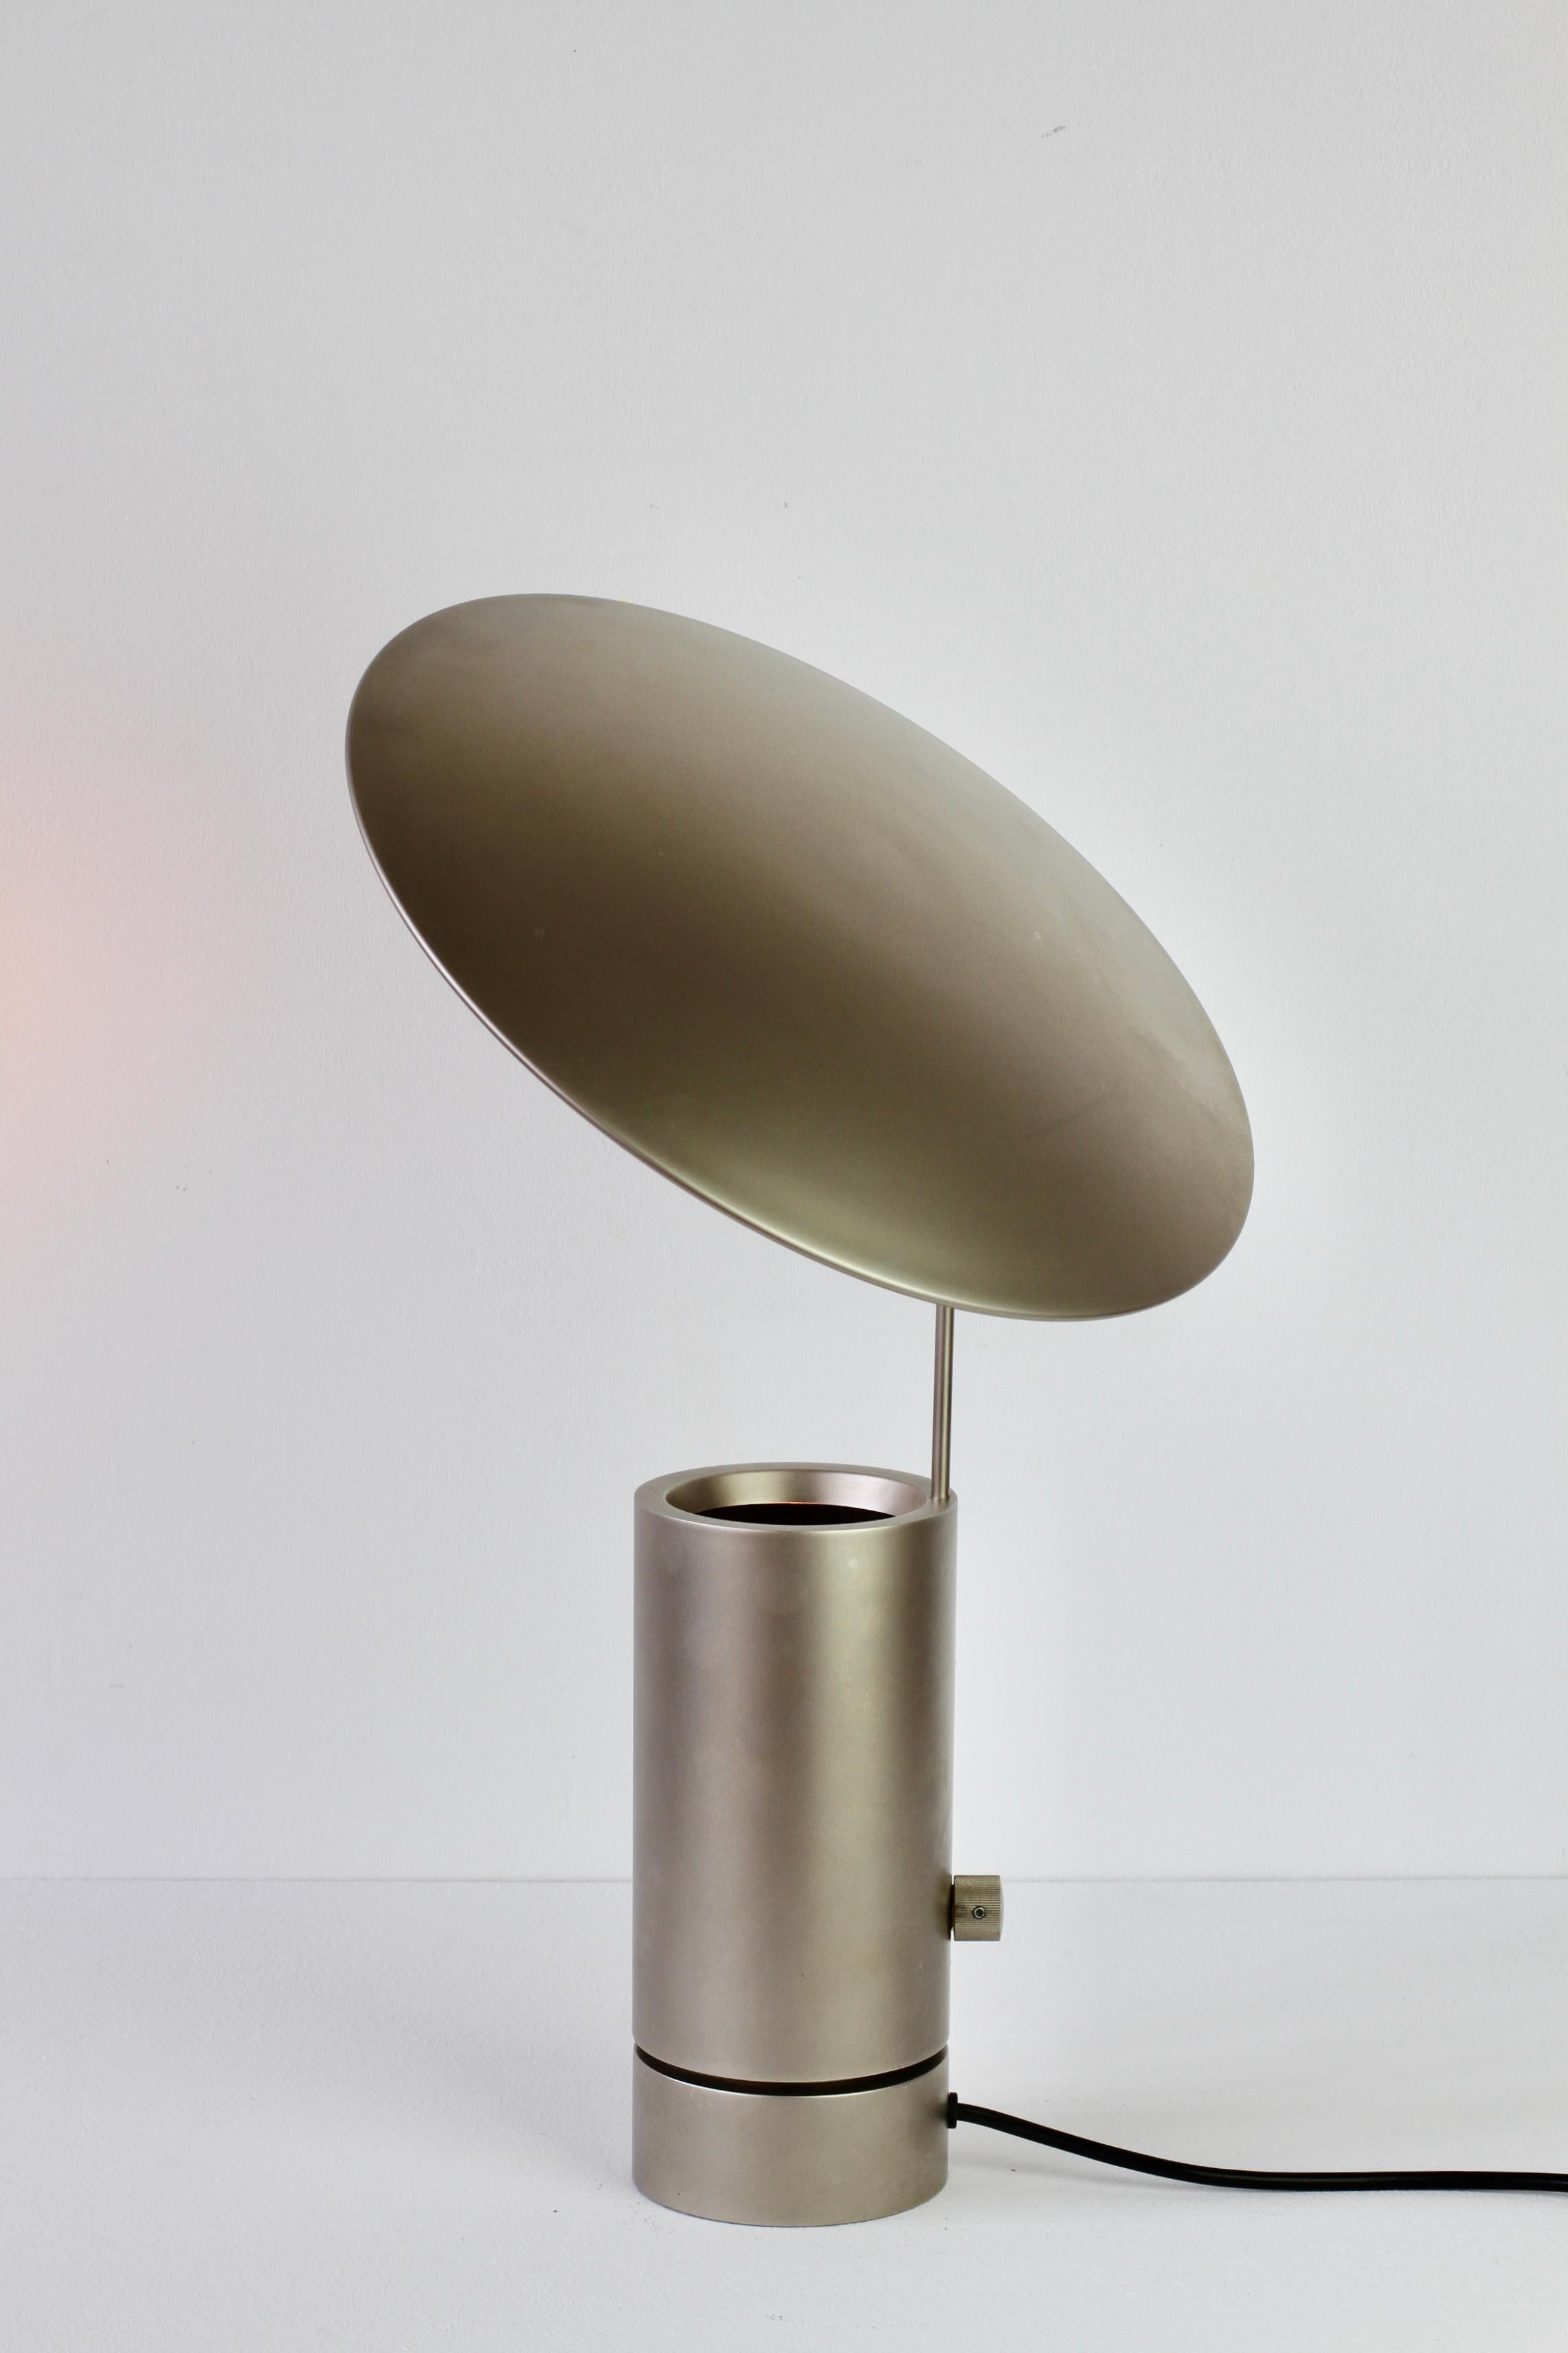 20th Century Florian Schulz Rare 'TOS' Vintage Modernist Brushed Satin Nickel Table Lamp For Sale